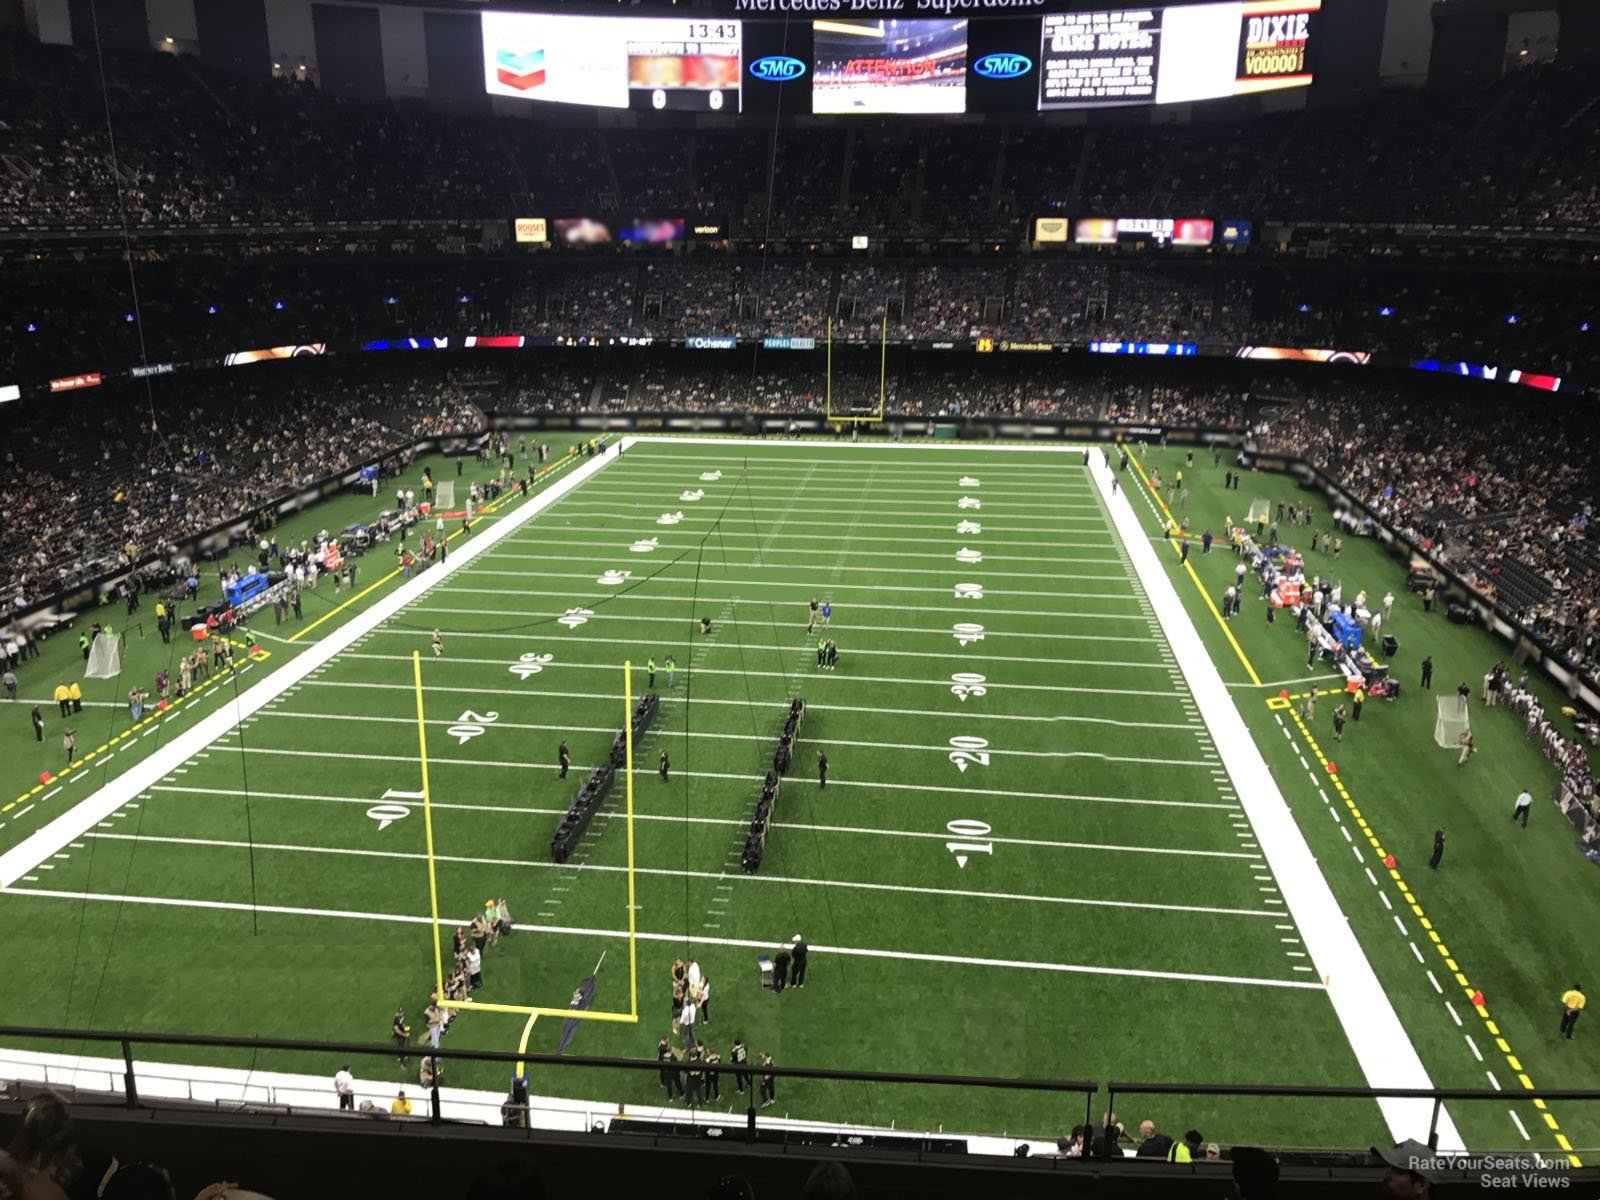 section 529, row 3 seat view  for football - caesars superdome